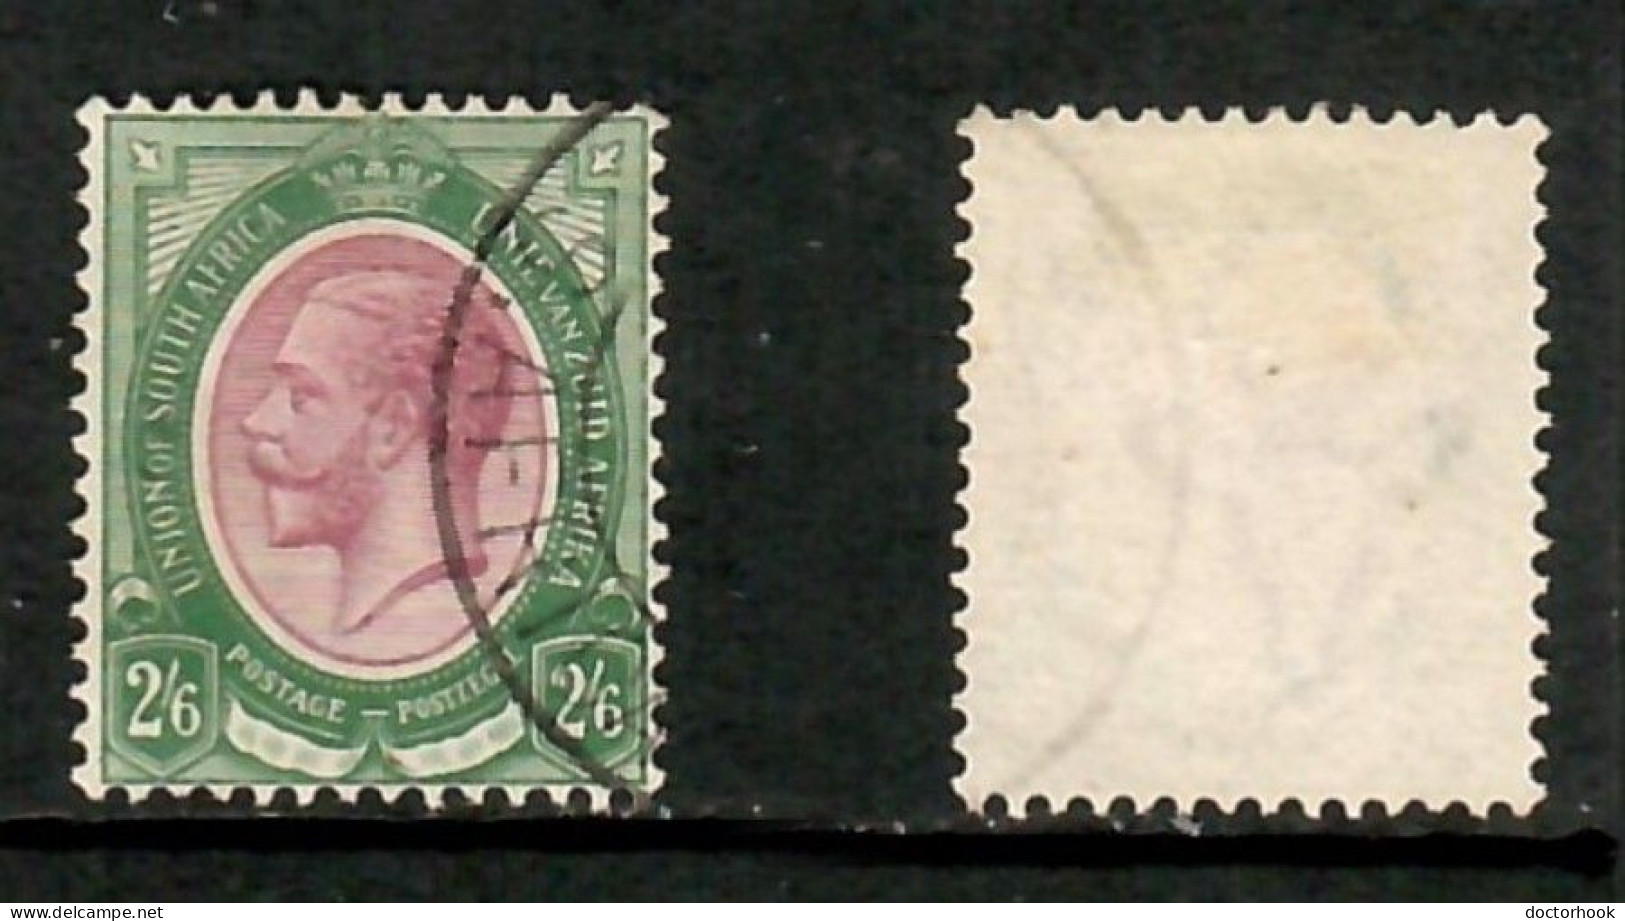 SOUTH AFRICA    Scott # 13 USED (CONDITION PER SCAN) (Stamp Scan # 1044-23) - Gebraucht